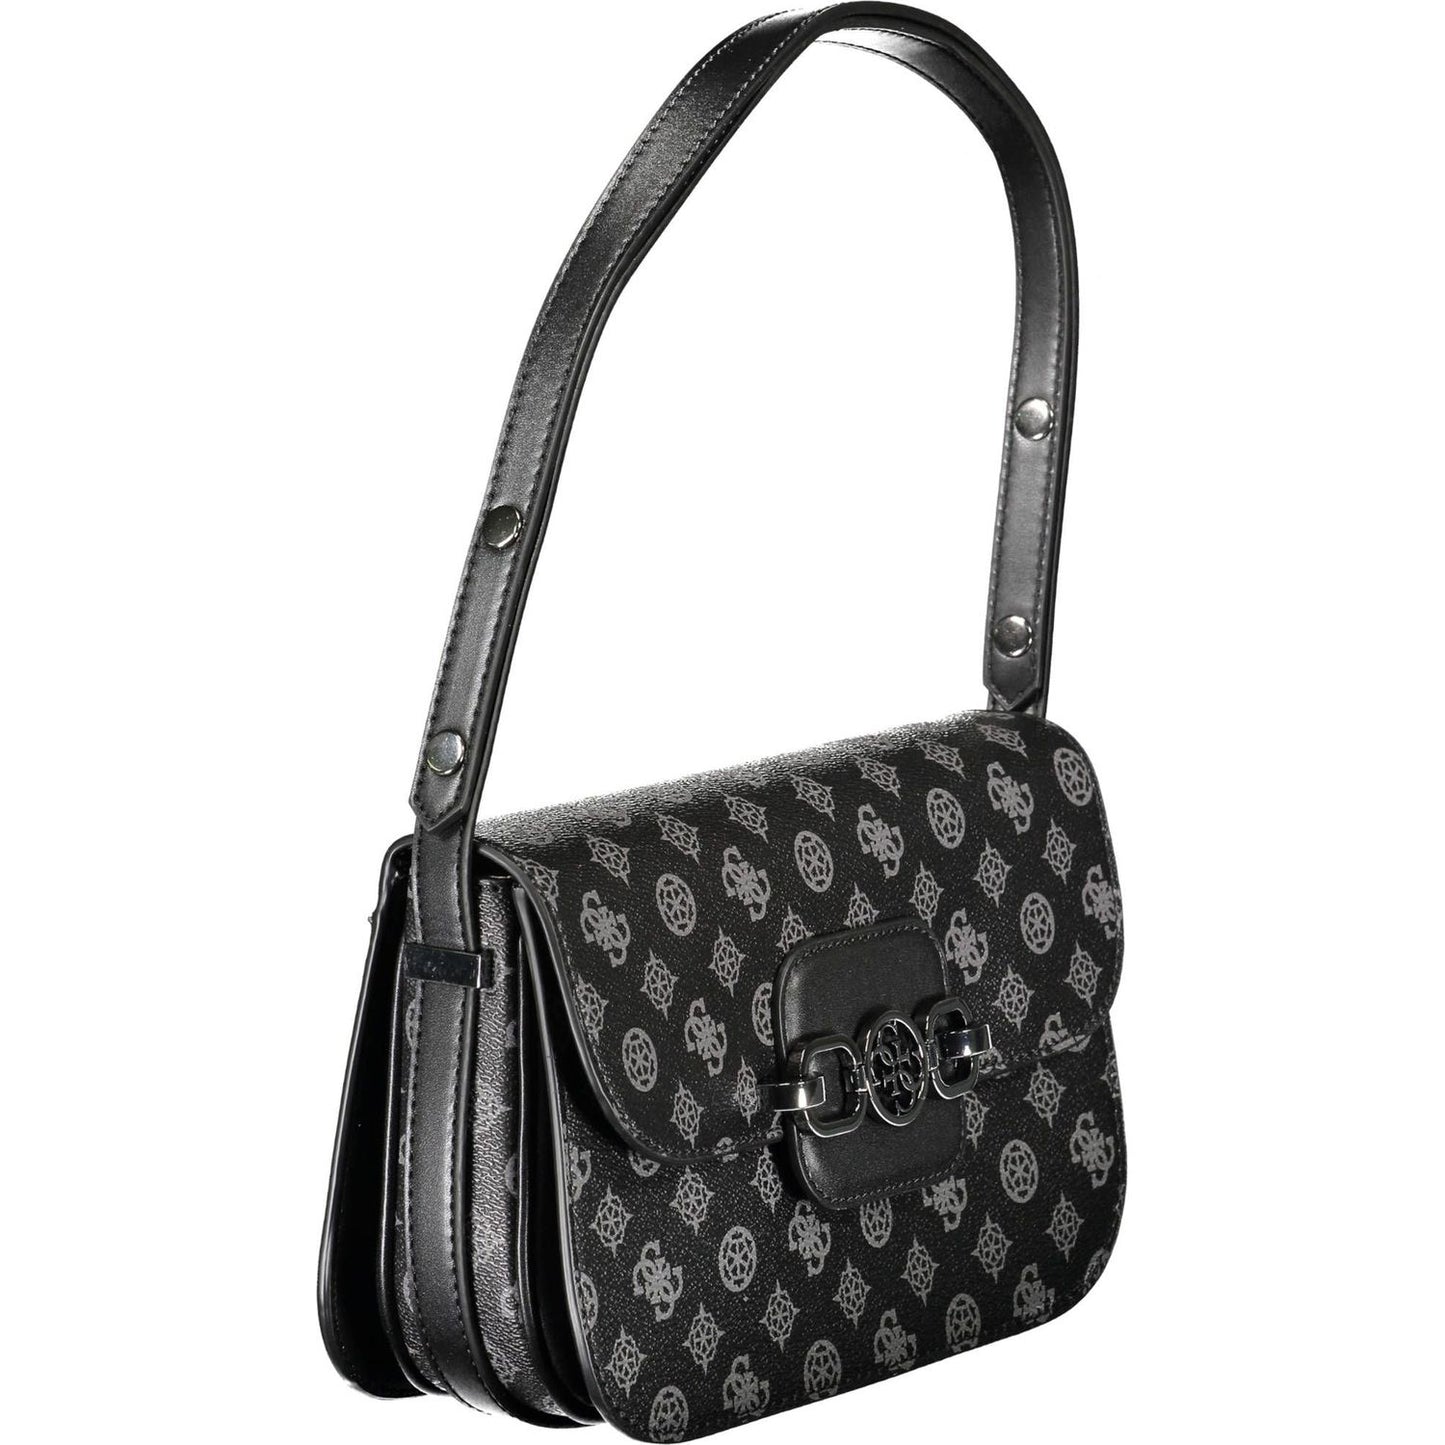 Guess Jeans Chic Black Triple Compartment Shoulder Bag chic-black-triple-compartment-shoulder-bag